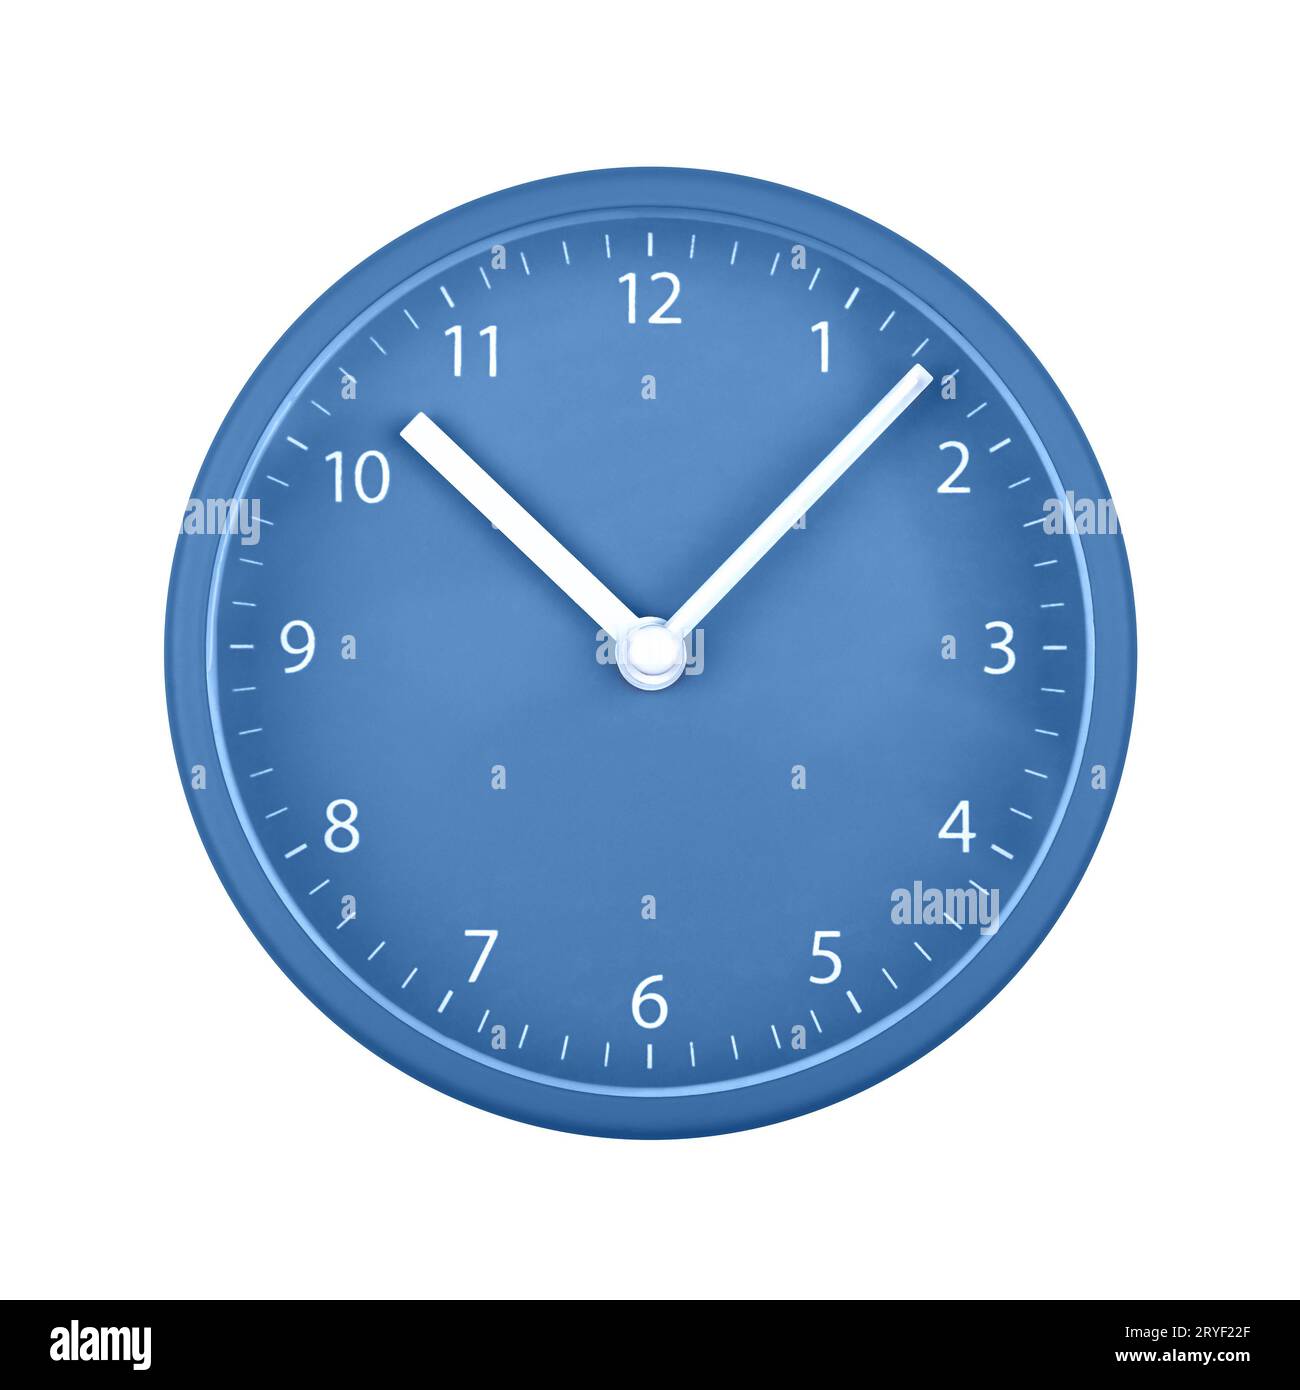 Blue wall clock face isolated on white Stock Photo